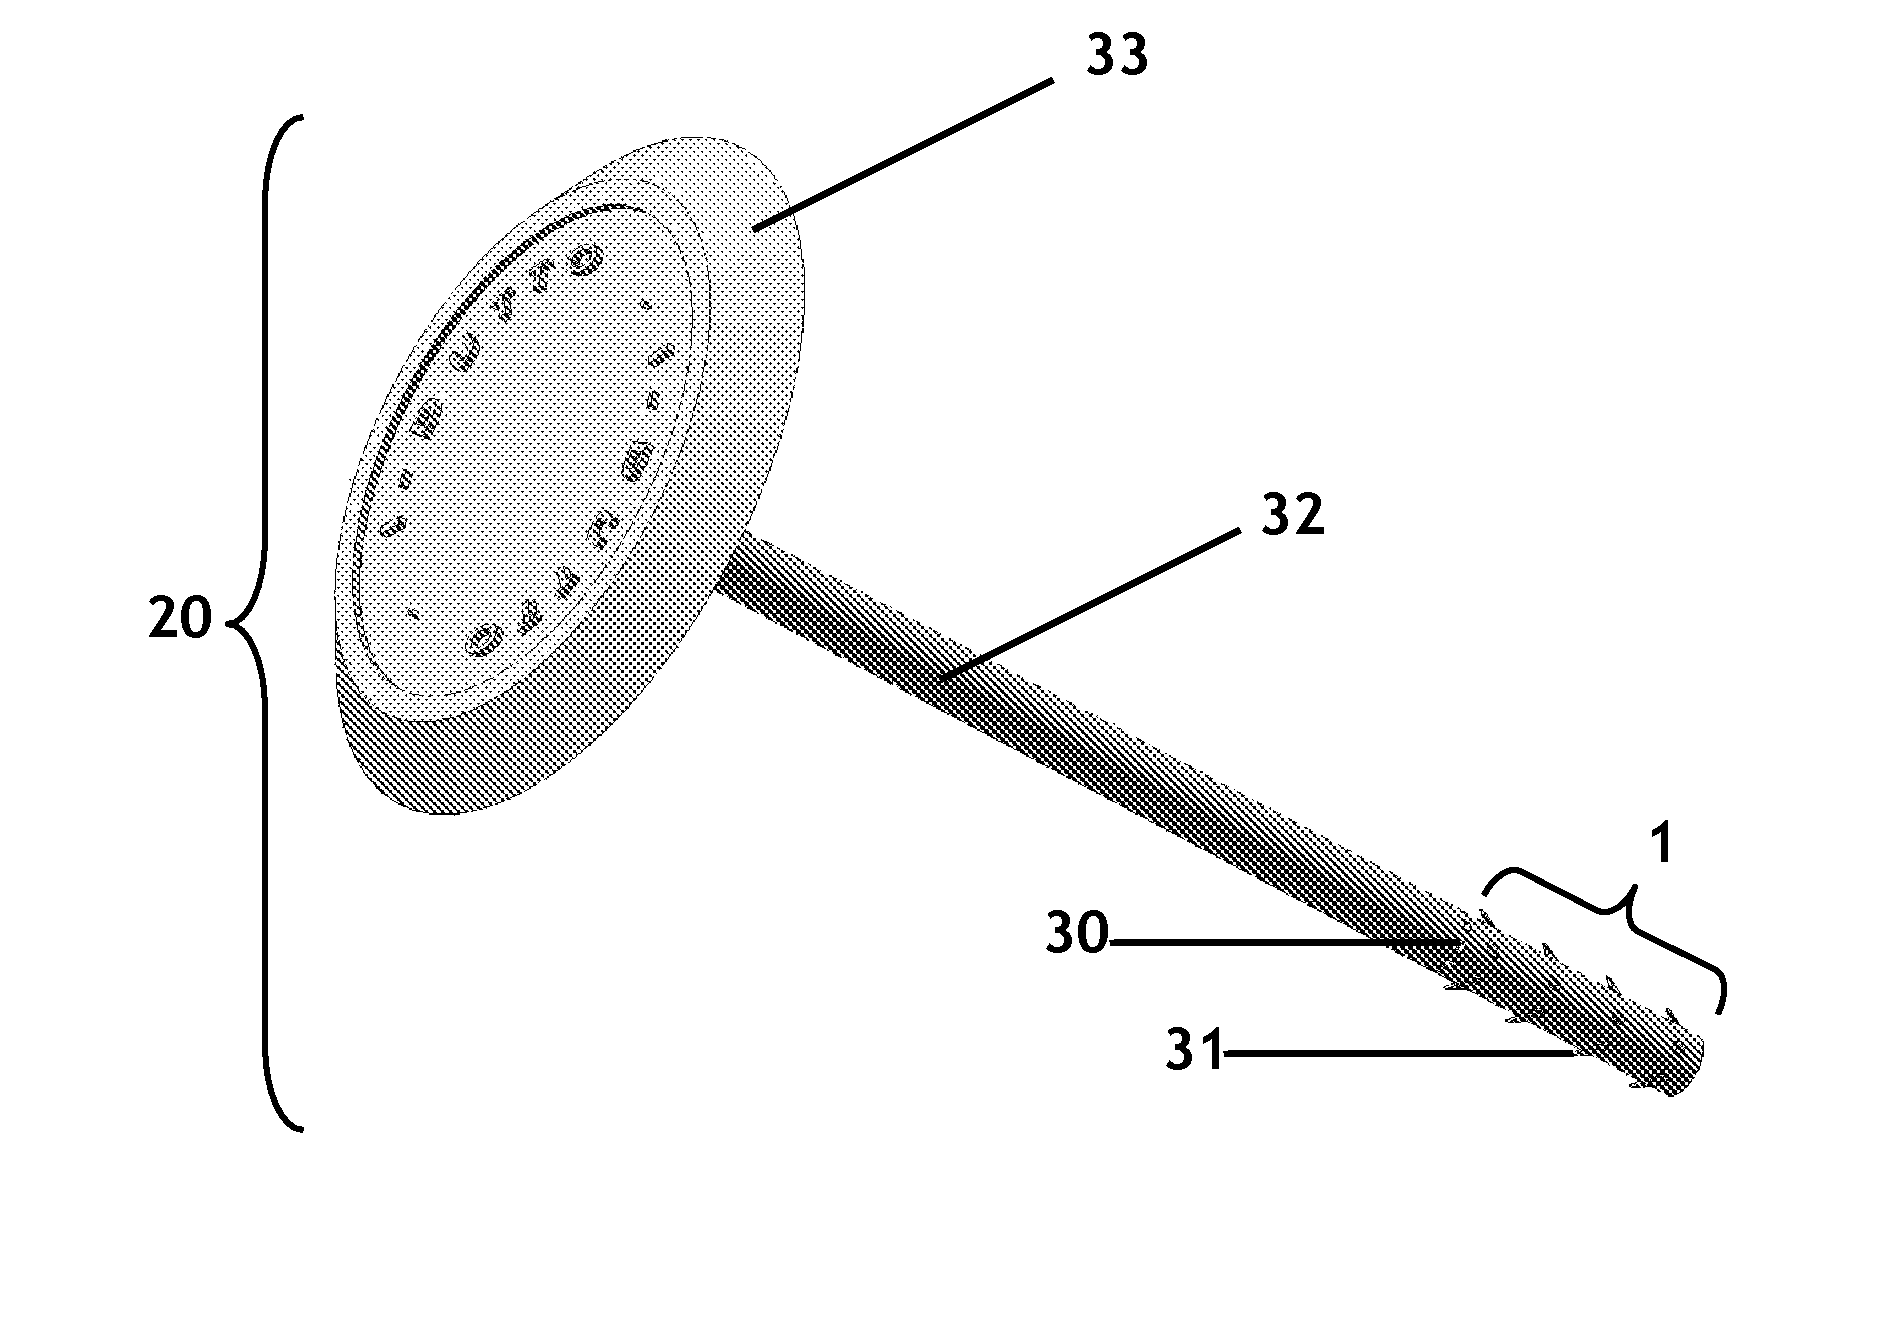 Device, system and method for the location and identification of as-built plants of pipes, conduits, cables or hidden objects